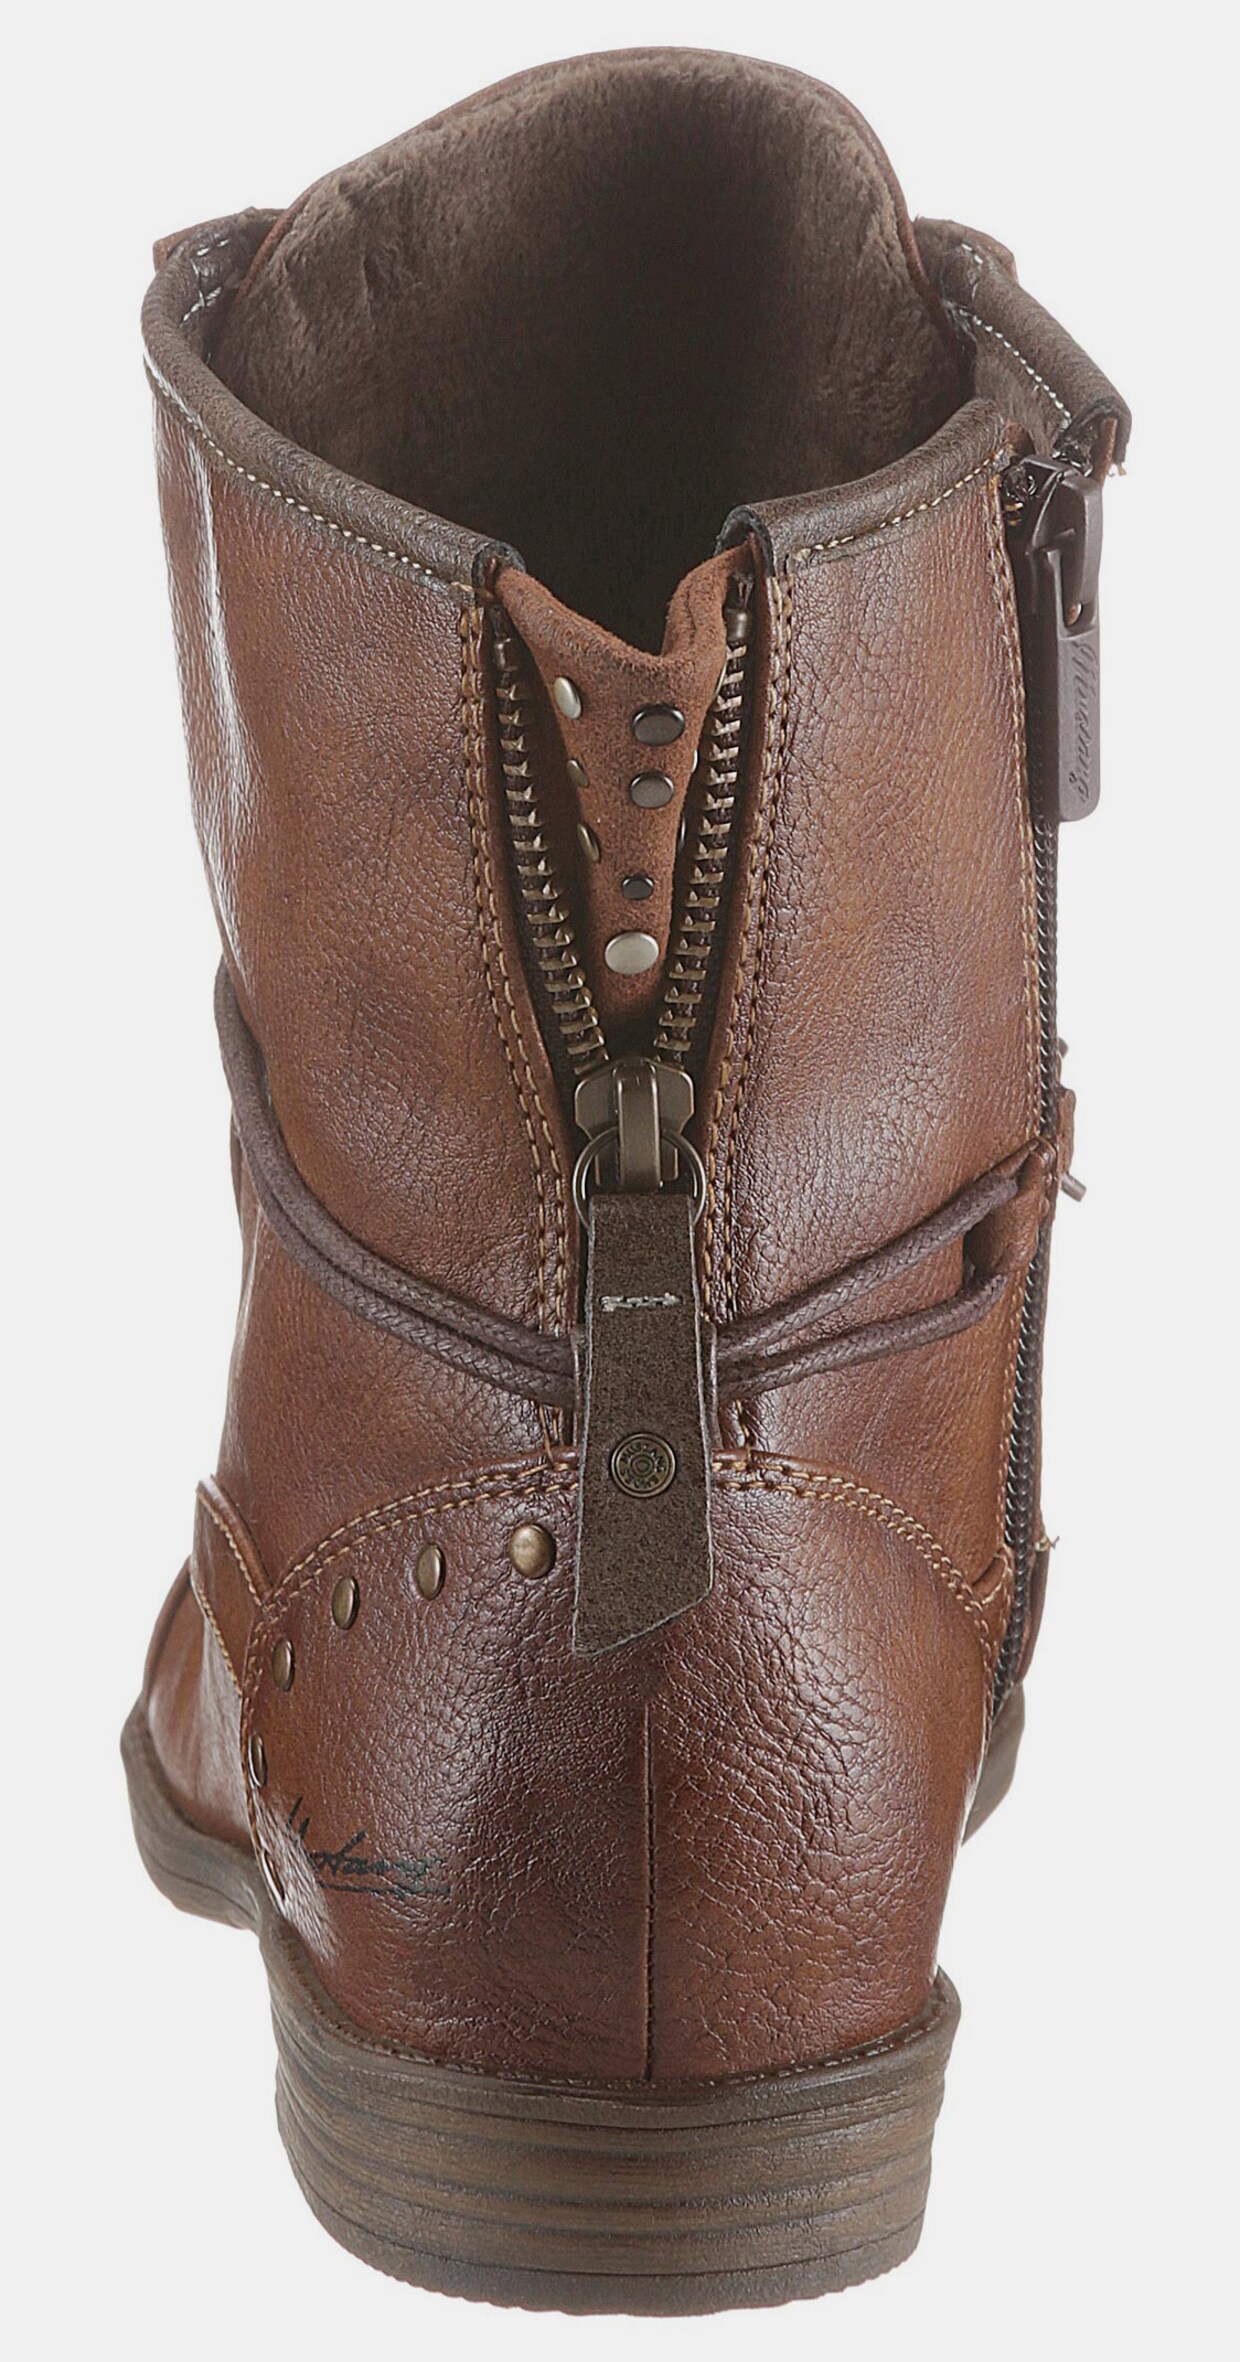 Mustang Shoes Schnürboots - cognac-used